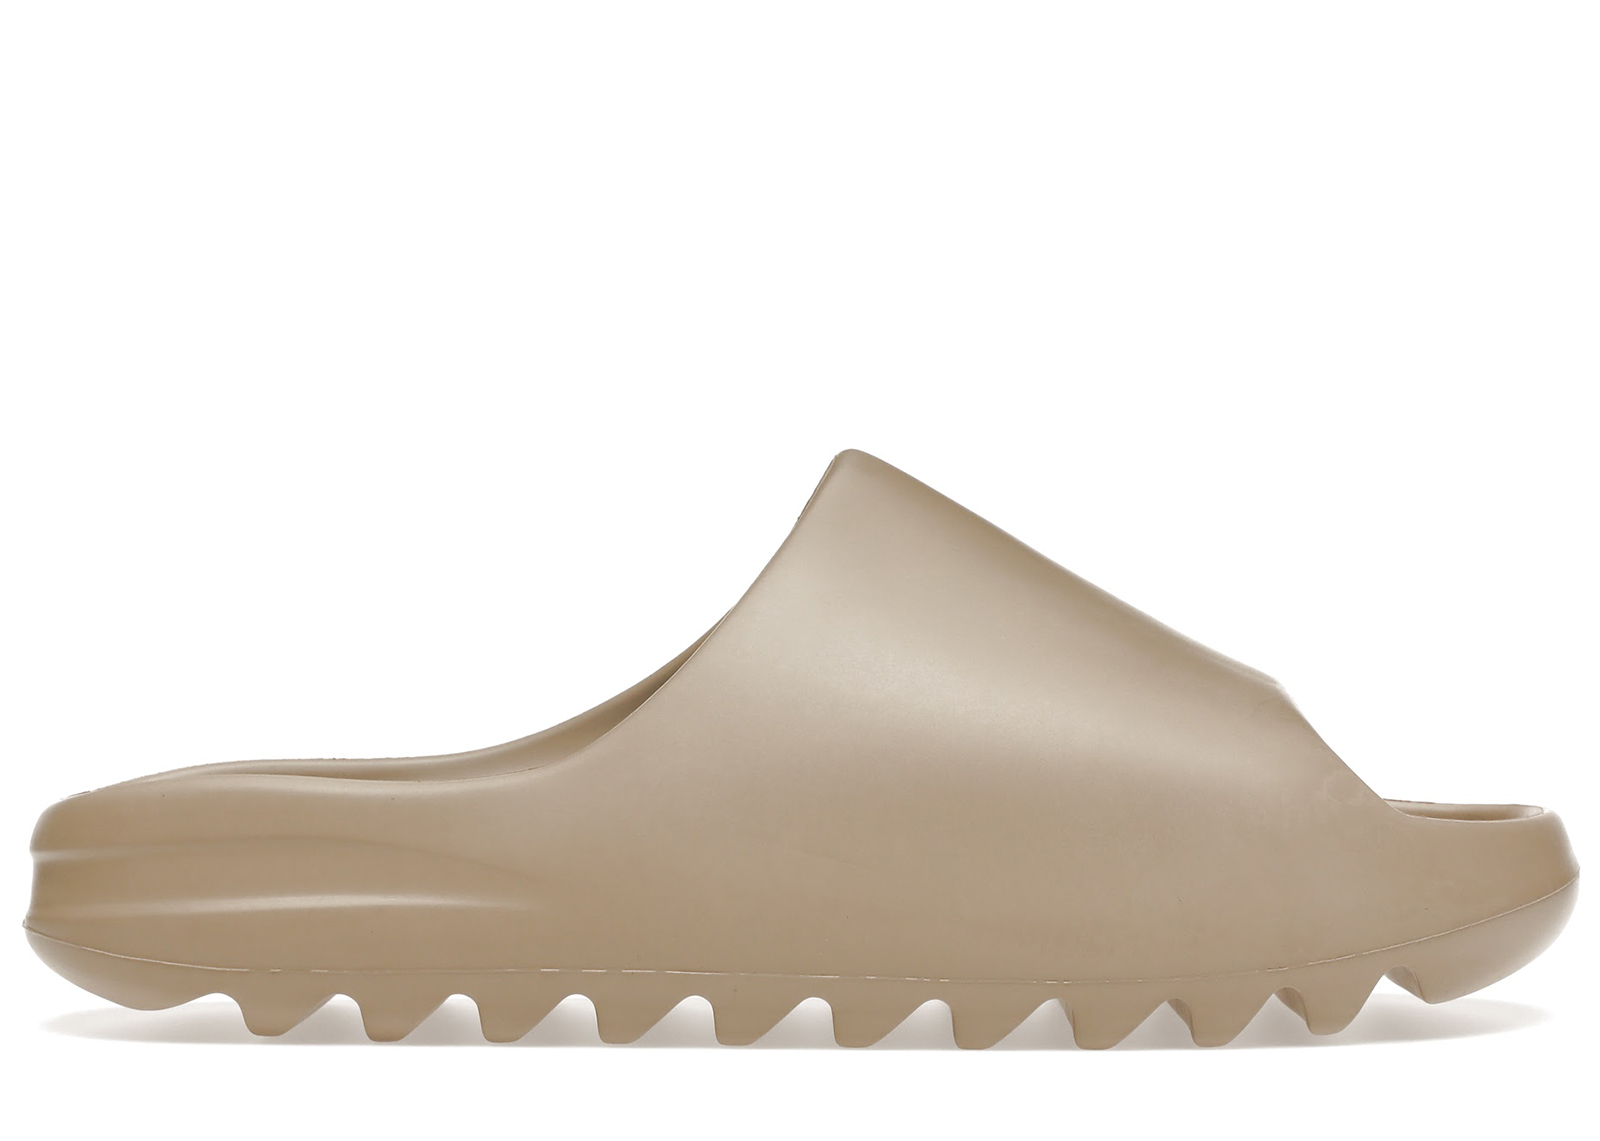 adidas Yeezy Slide Pure (First Release) - GZ5554 - US